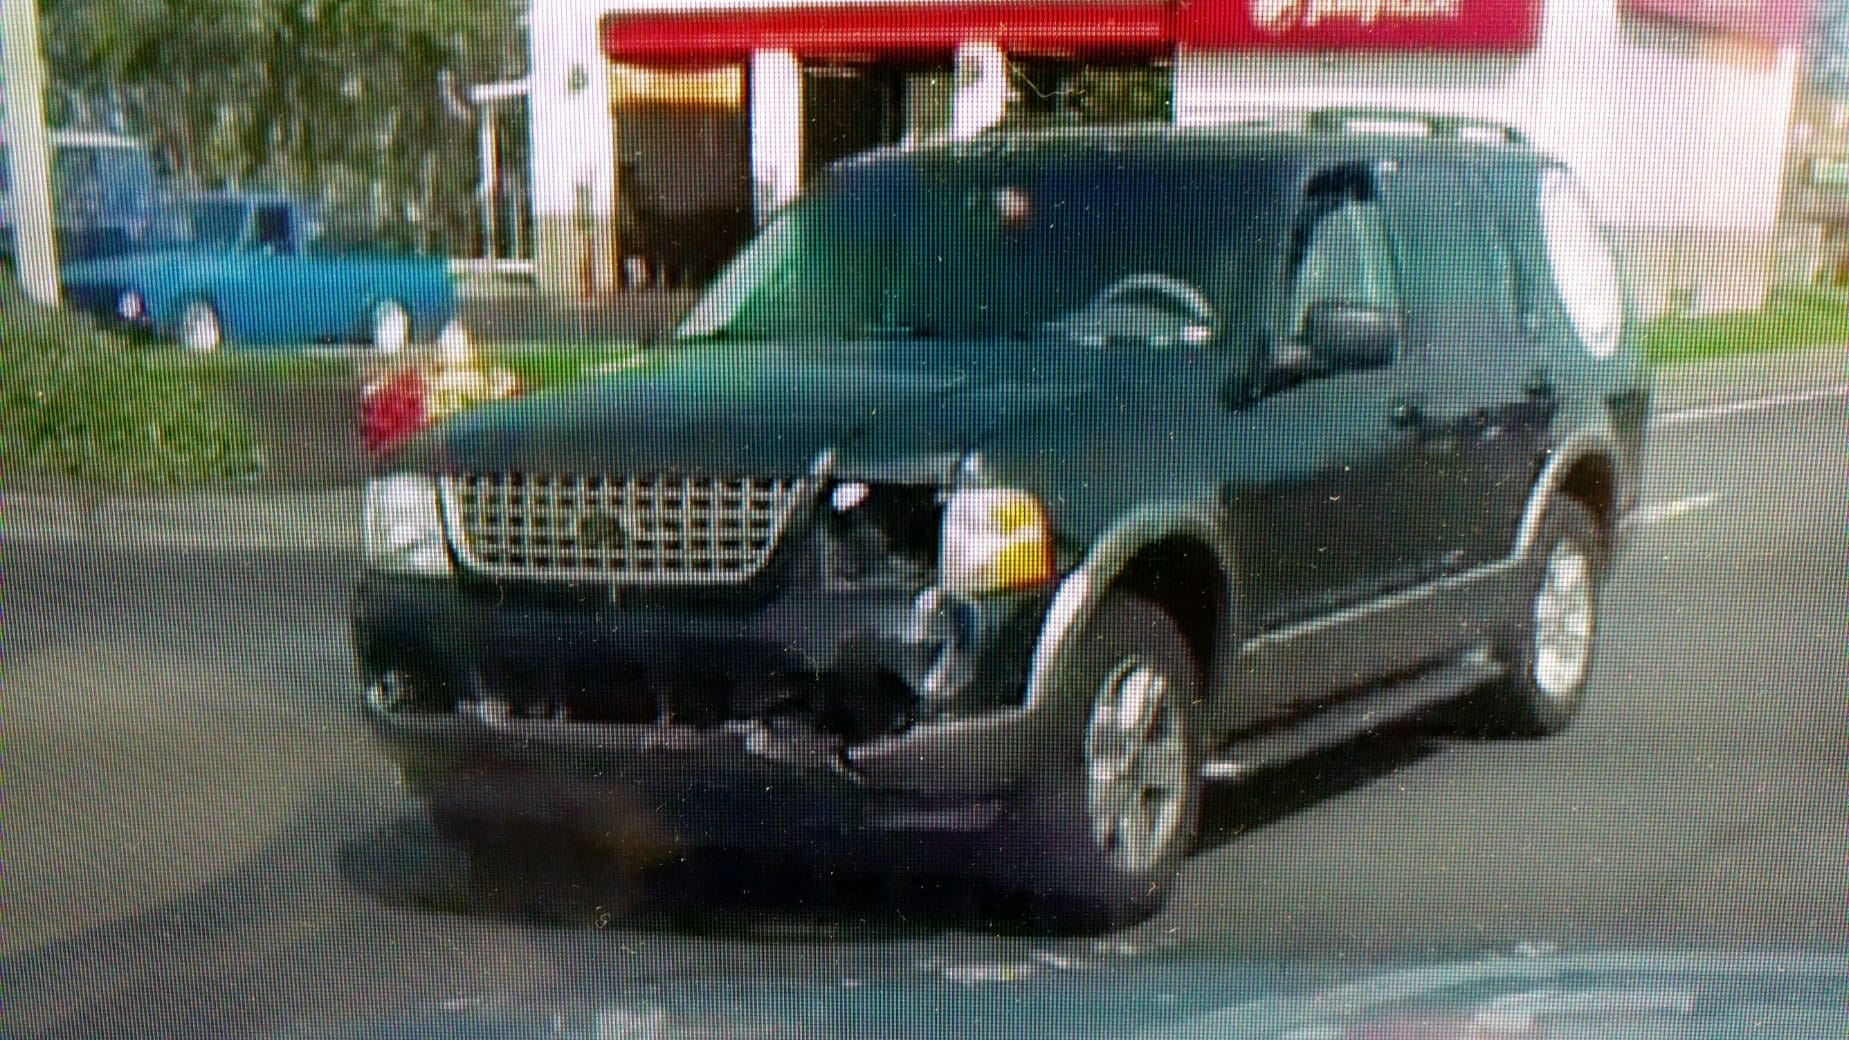 Investigators are looking for this Ford Explorer, shown here in an image from the Vancouver Police Department, which they suspect was driven away following an injury hit-and-run crash Monday evening.